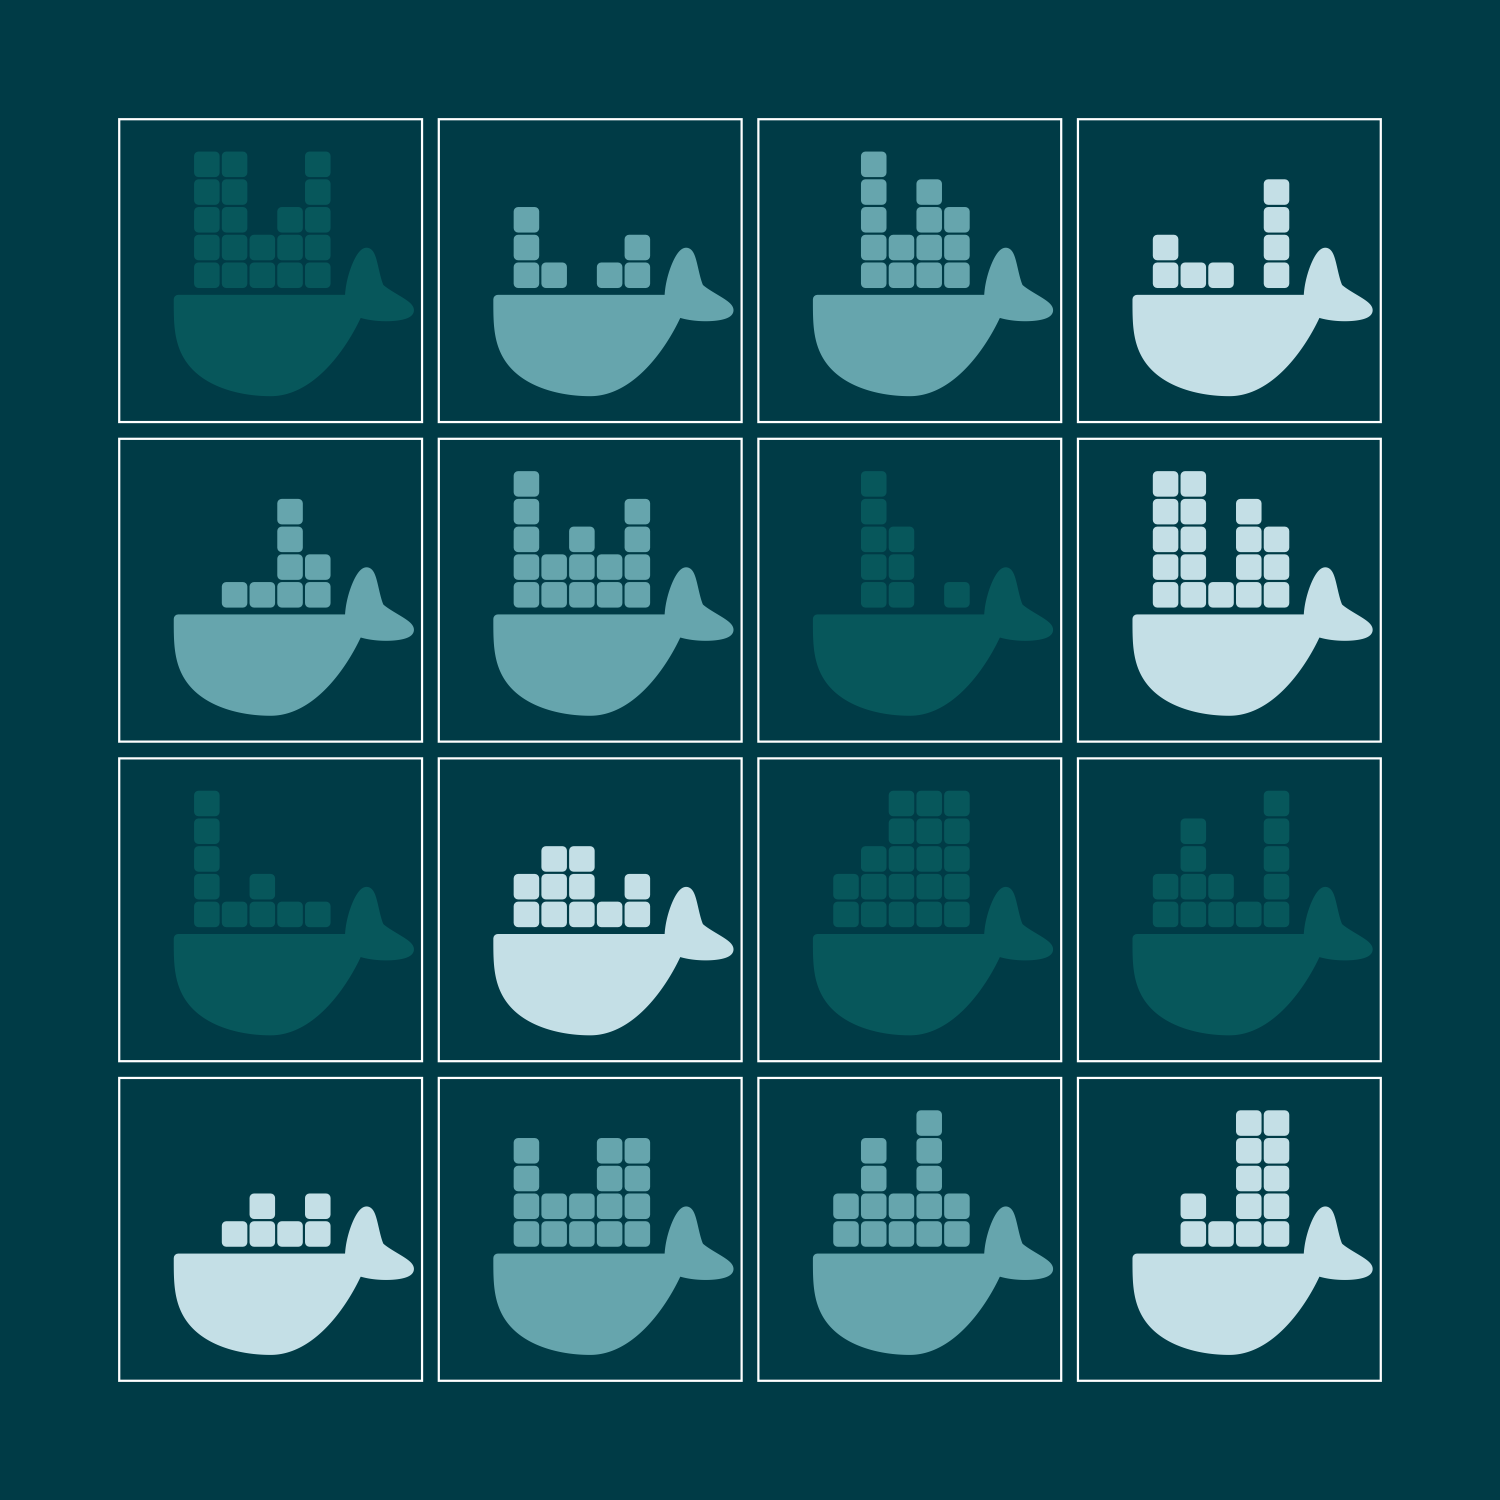 A 4x4 grid of cartoon whales, all in the style of the Docker logo